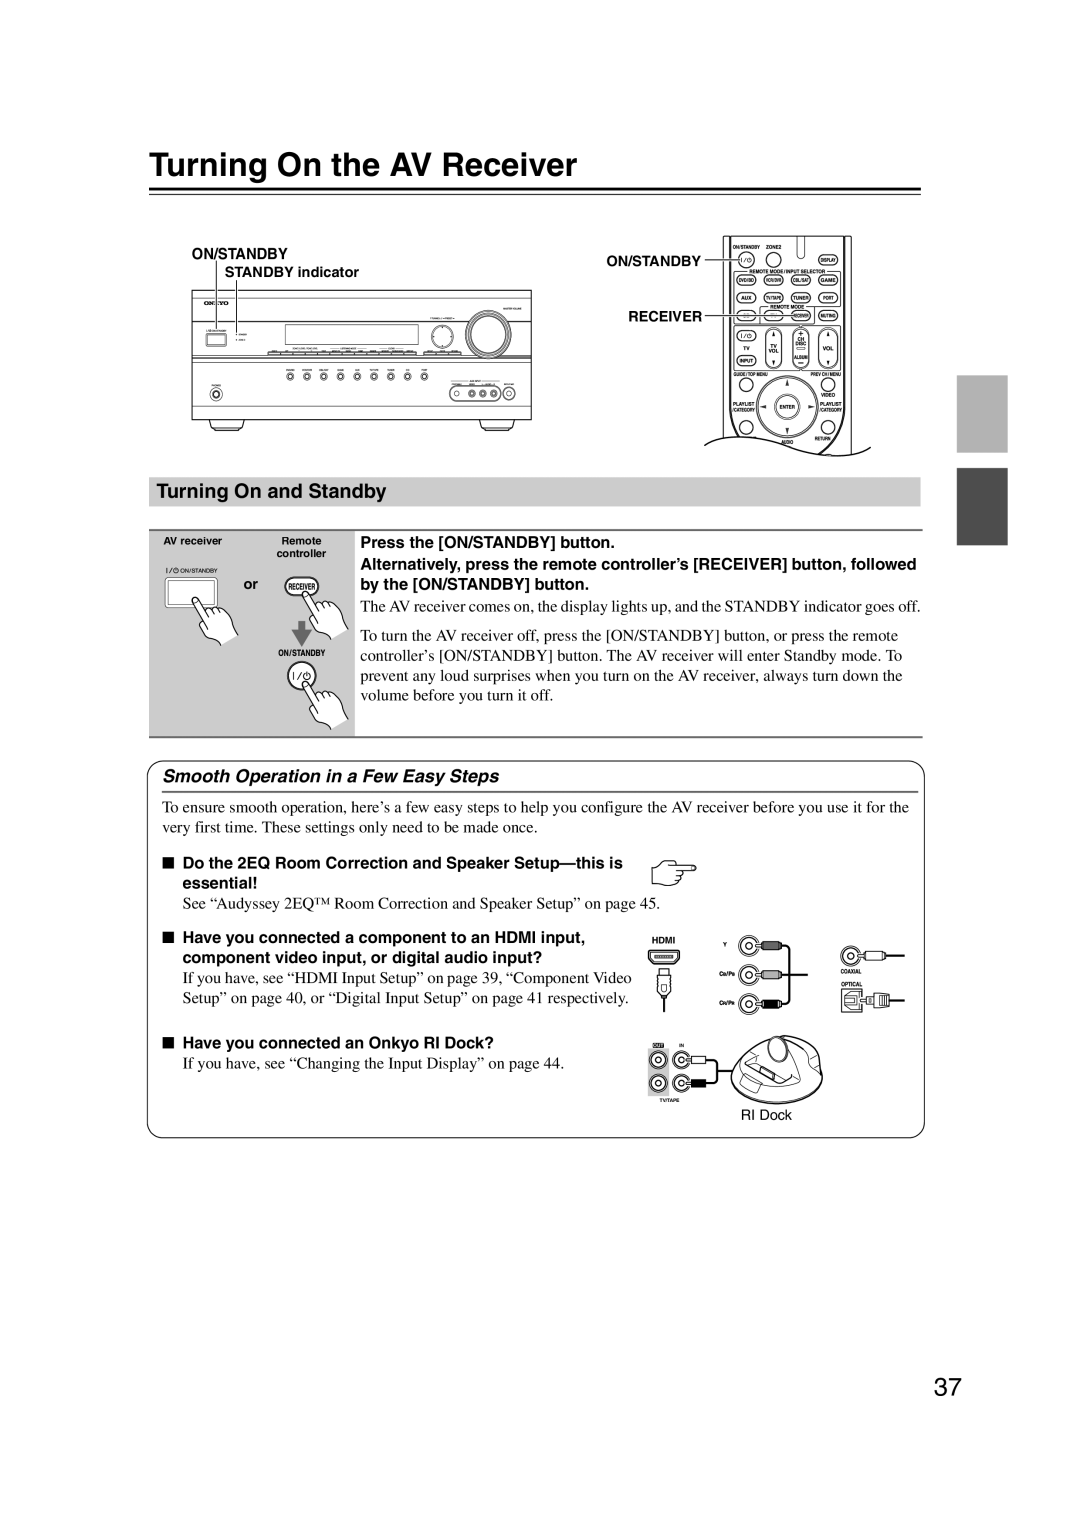 Onkyo HT-RC160 instruction manual Turning On the AV Receiver, Turning On and Standby, Smooth Operation in a Few Easy Steps 